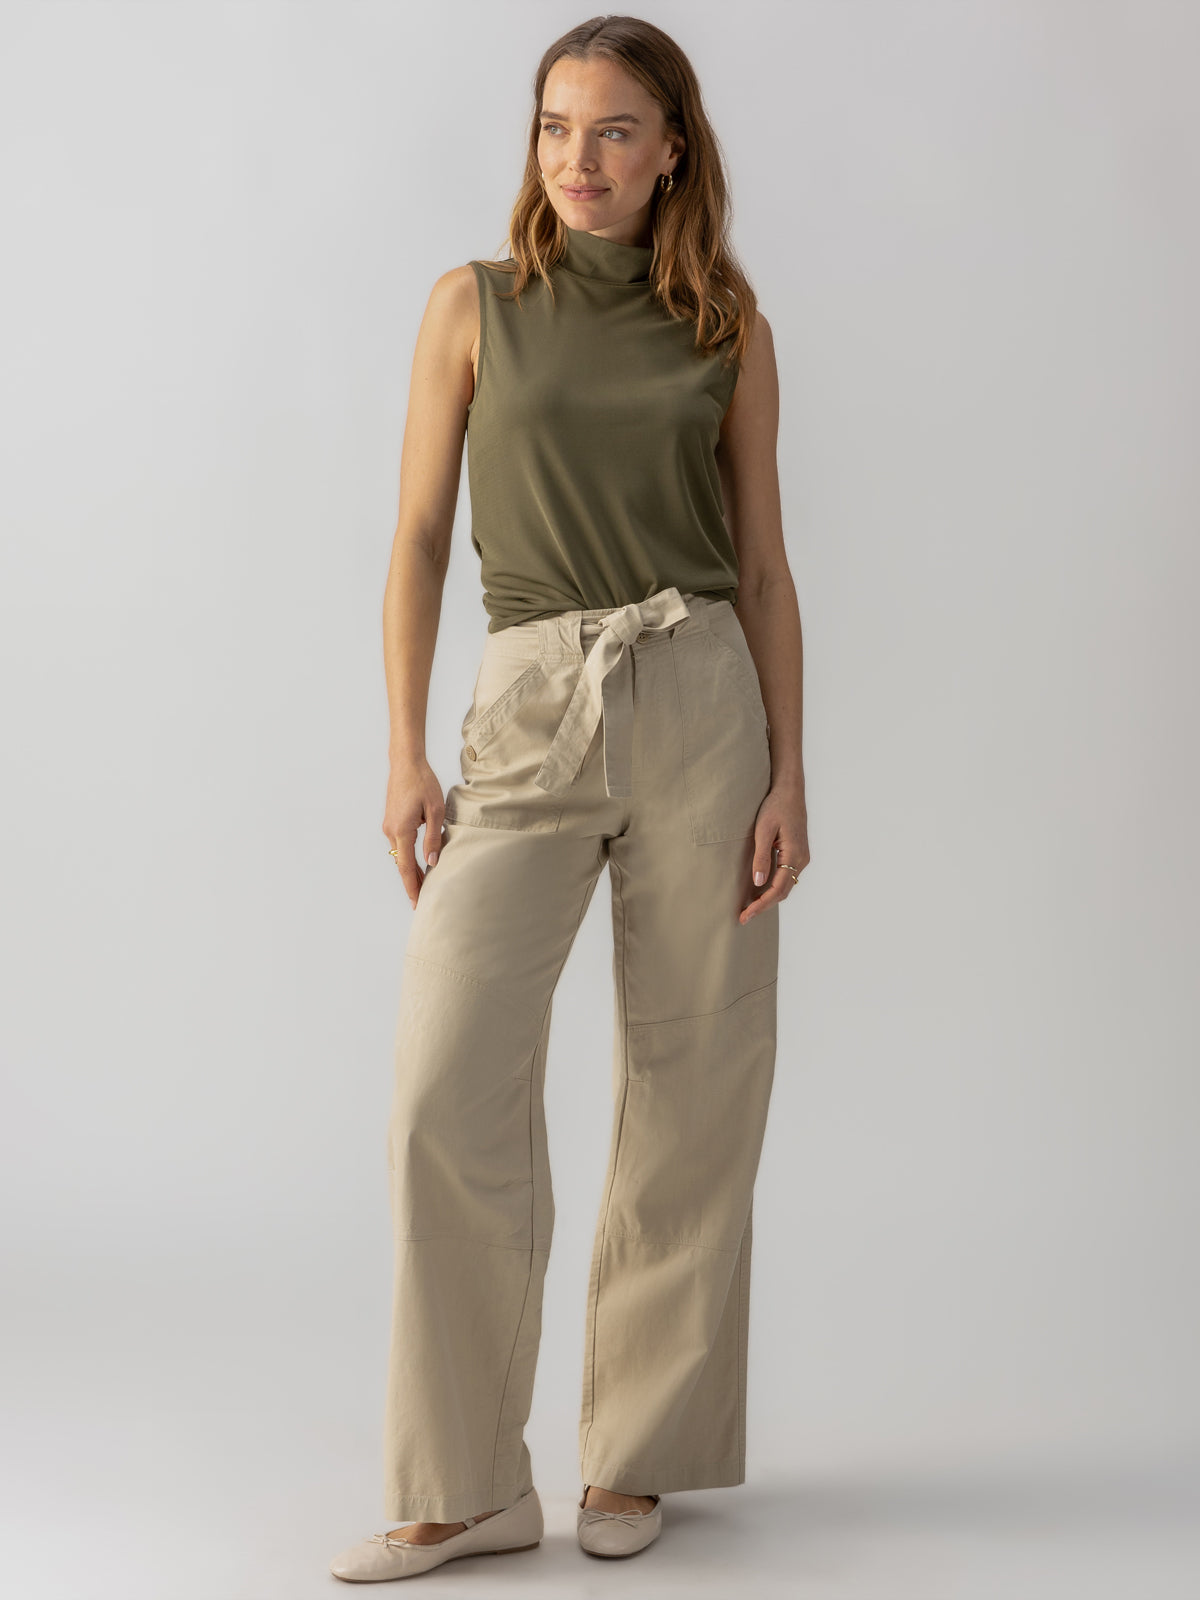 Reissue 90's Sash Extended Standard Rise Pant Marble Beige